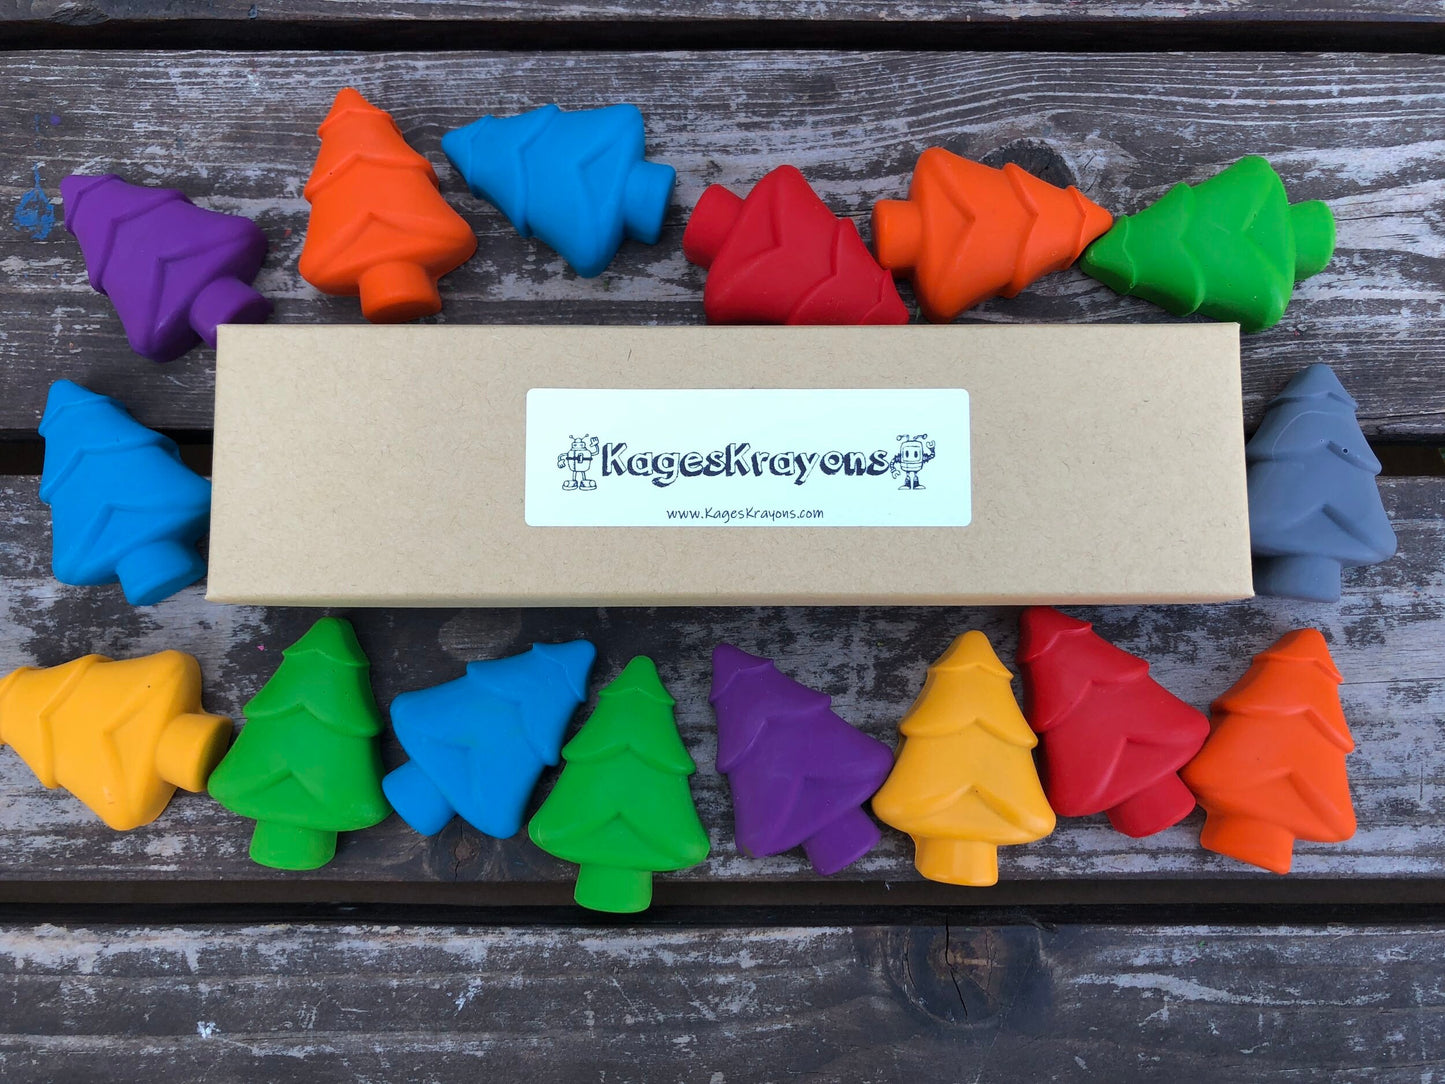 Christmas Tree Crayons - Gifts For Kids - Stocking Stuffers For Kids - Kids Gifts - Kids Party Favors - Stocking Stuffers - Christmas Gifts